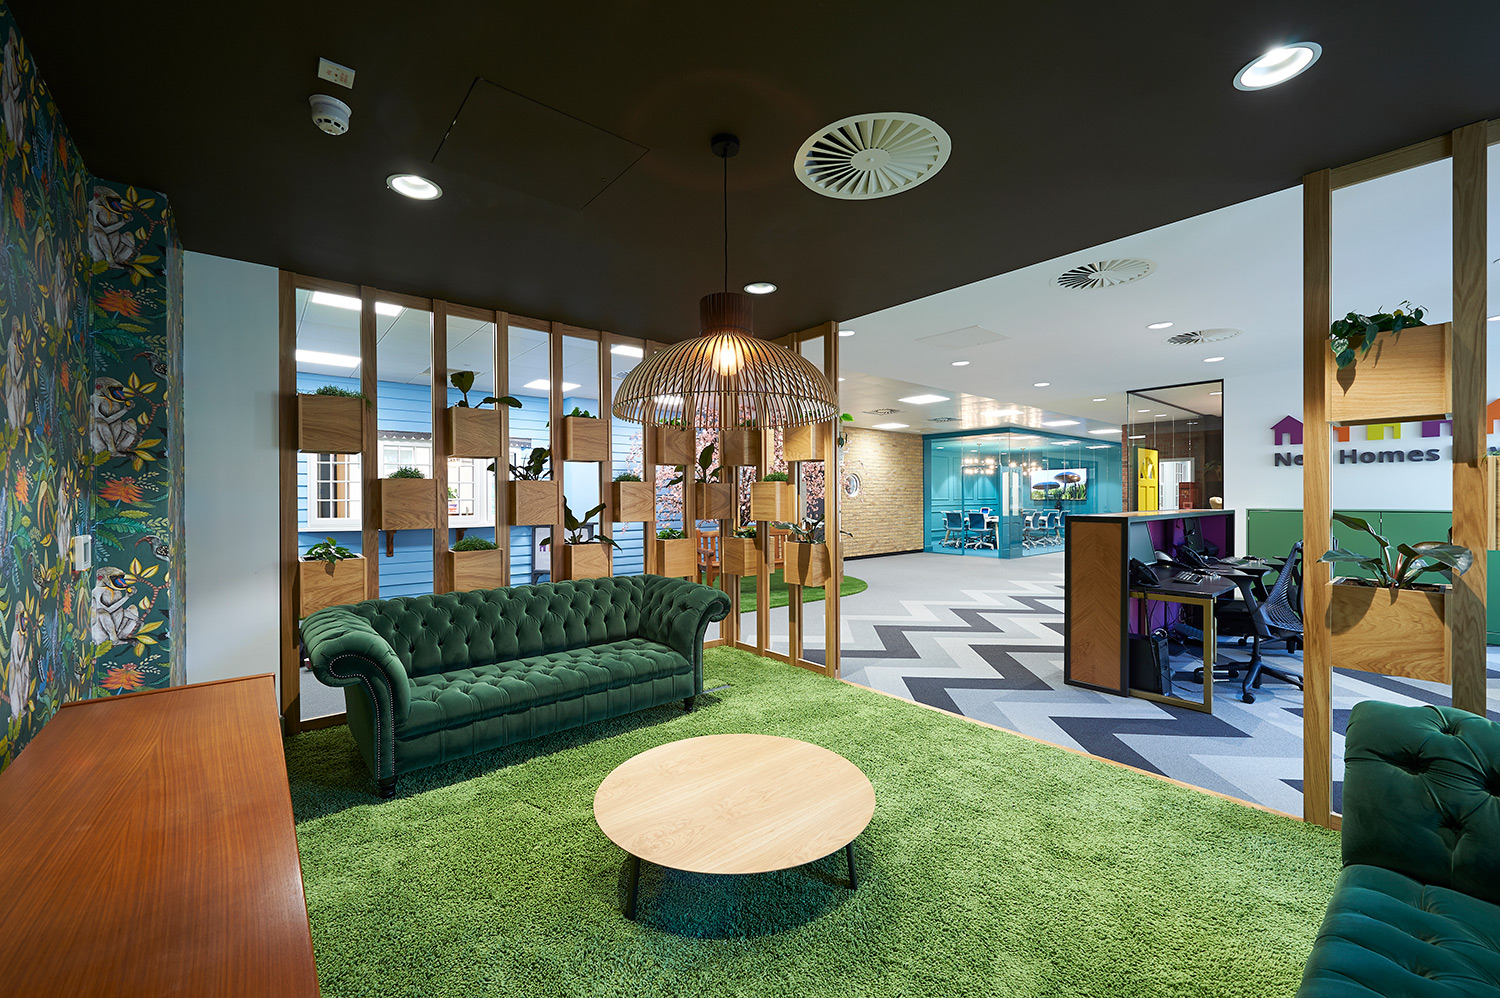 New Homes Law Office Fit-Out Spacio